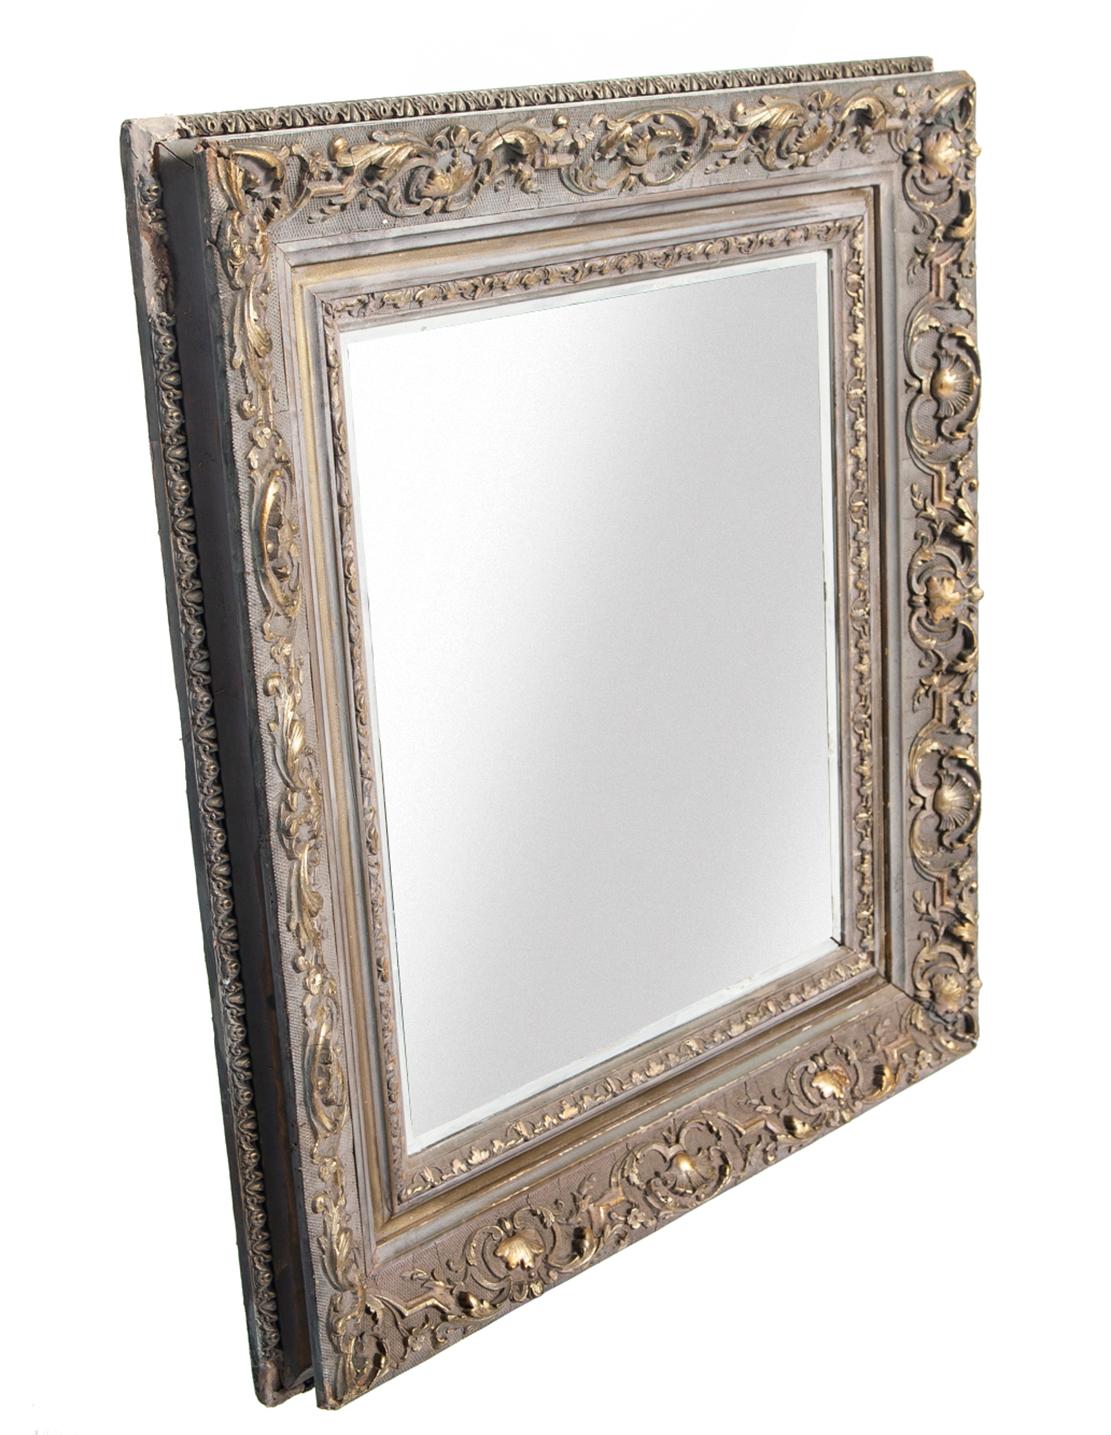 20th Century Victorian Rectangular Painted Mirror with Gilt Accents For Sale